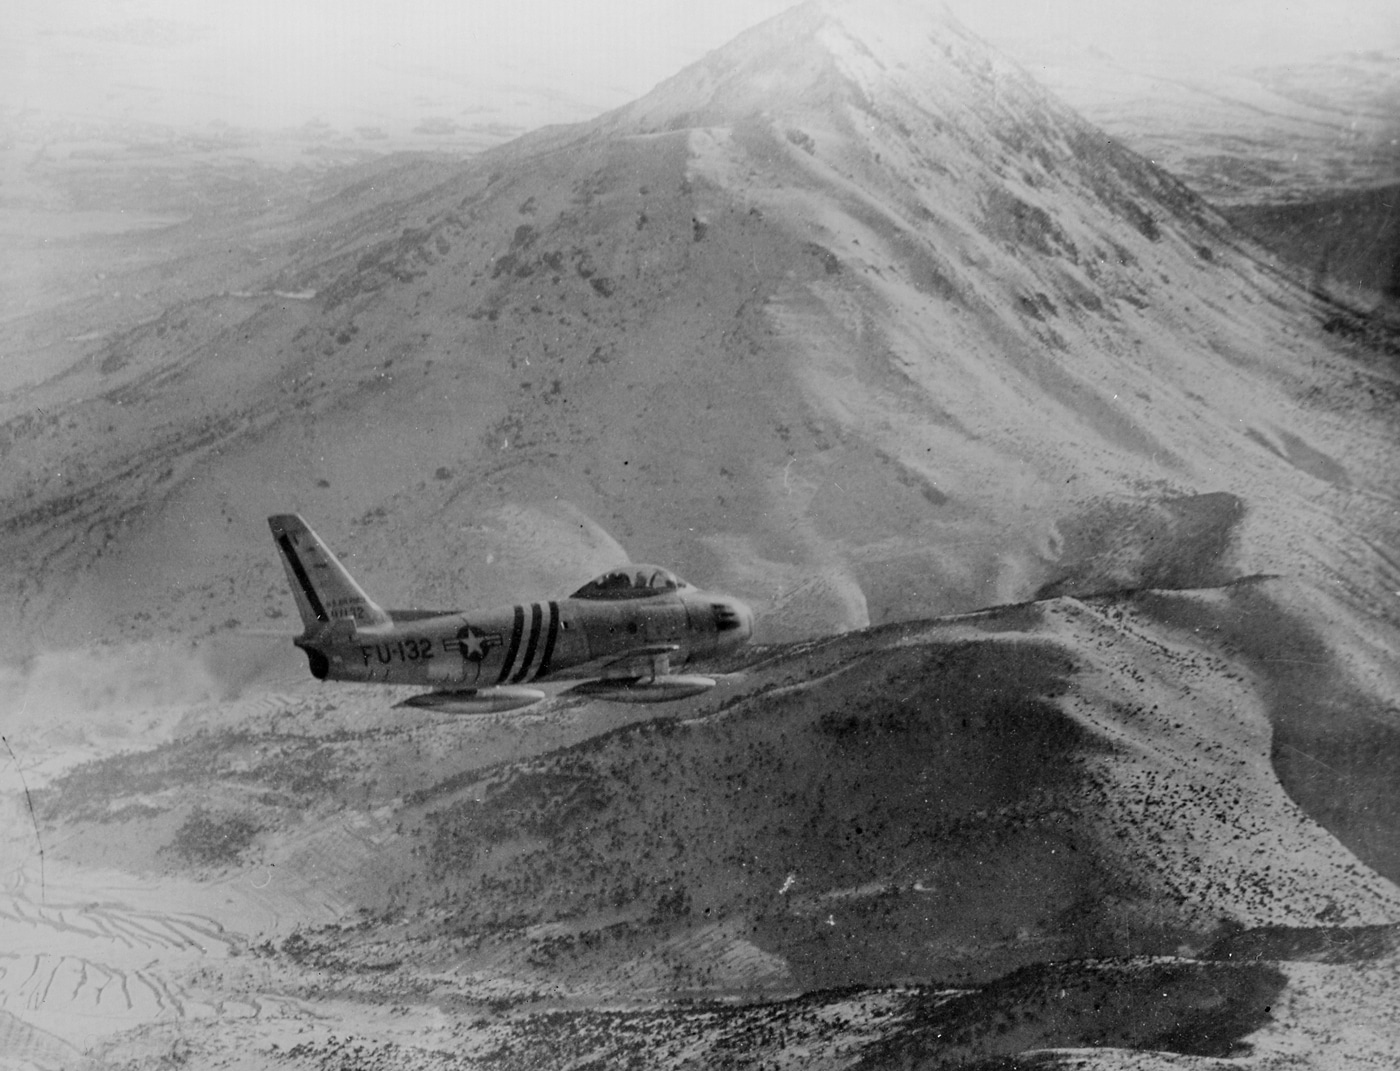 In this image from the Korean War, we see an F-86 flying a patrol over North Korea. The F-86 enjoyed a reputation in this conflict as the North American P-51 Mustang did in World War II. More pilots made fighter ace in the F-86 than any other American jet in Korea.